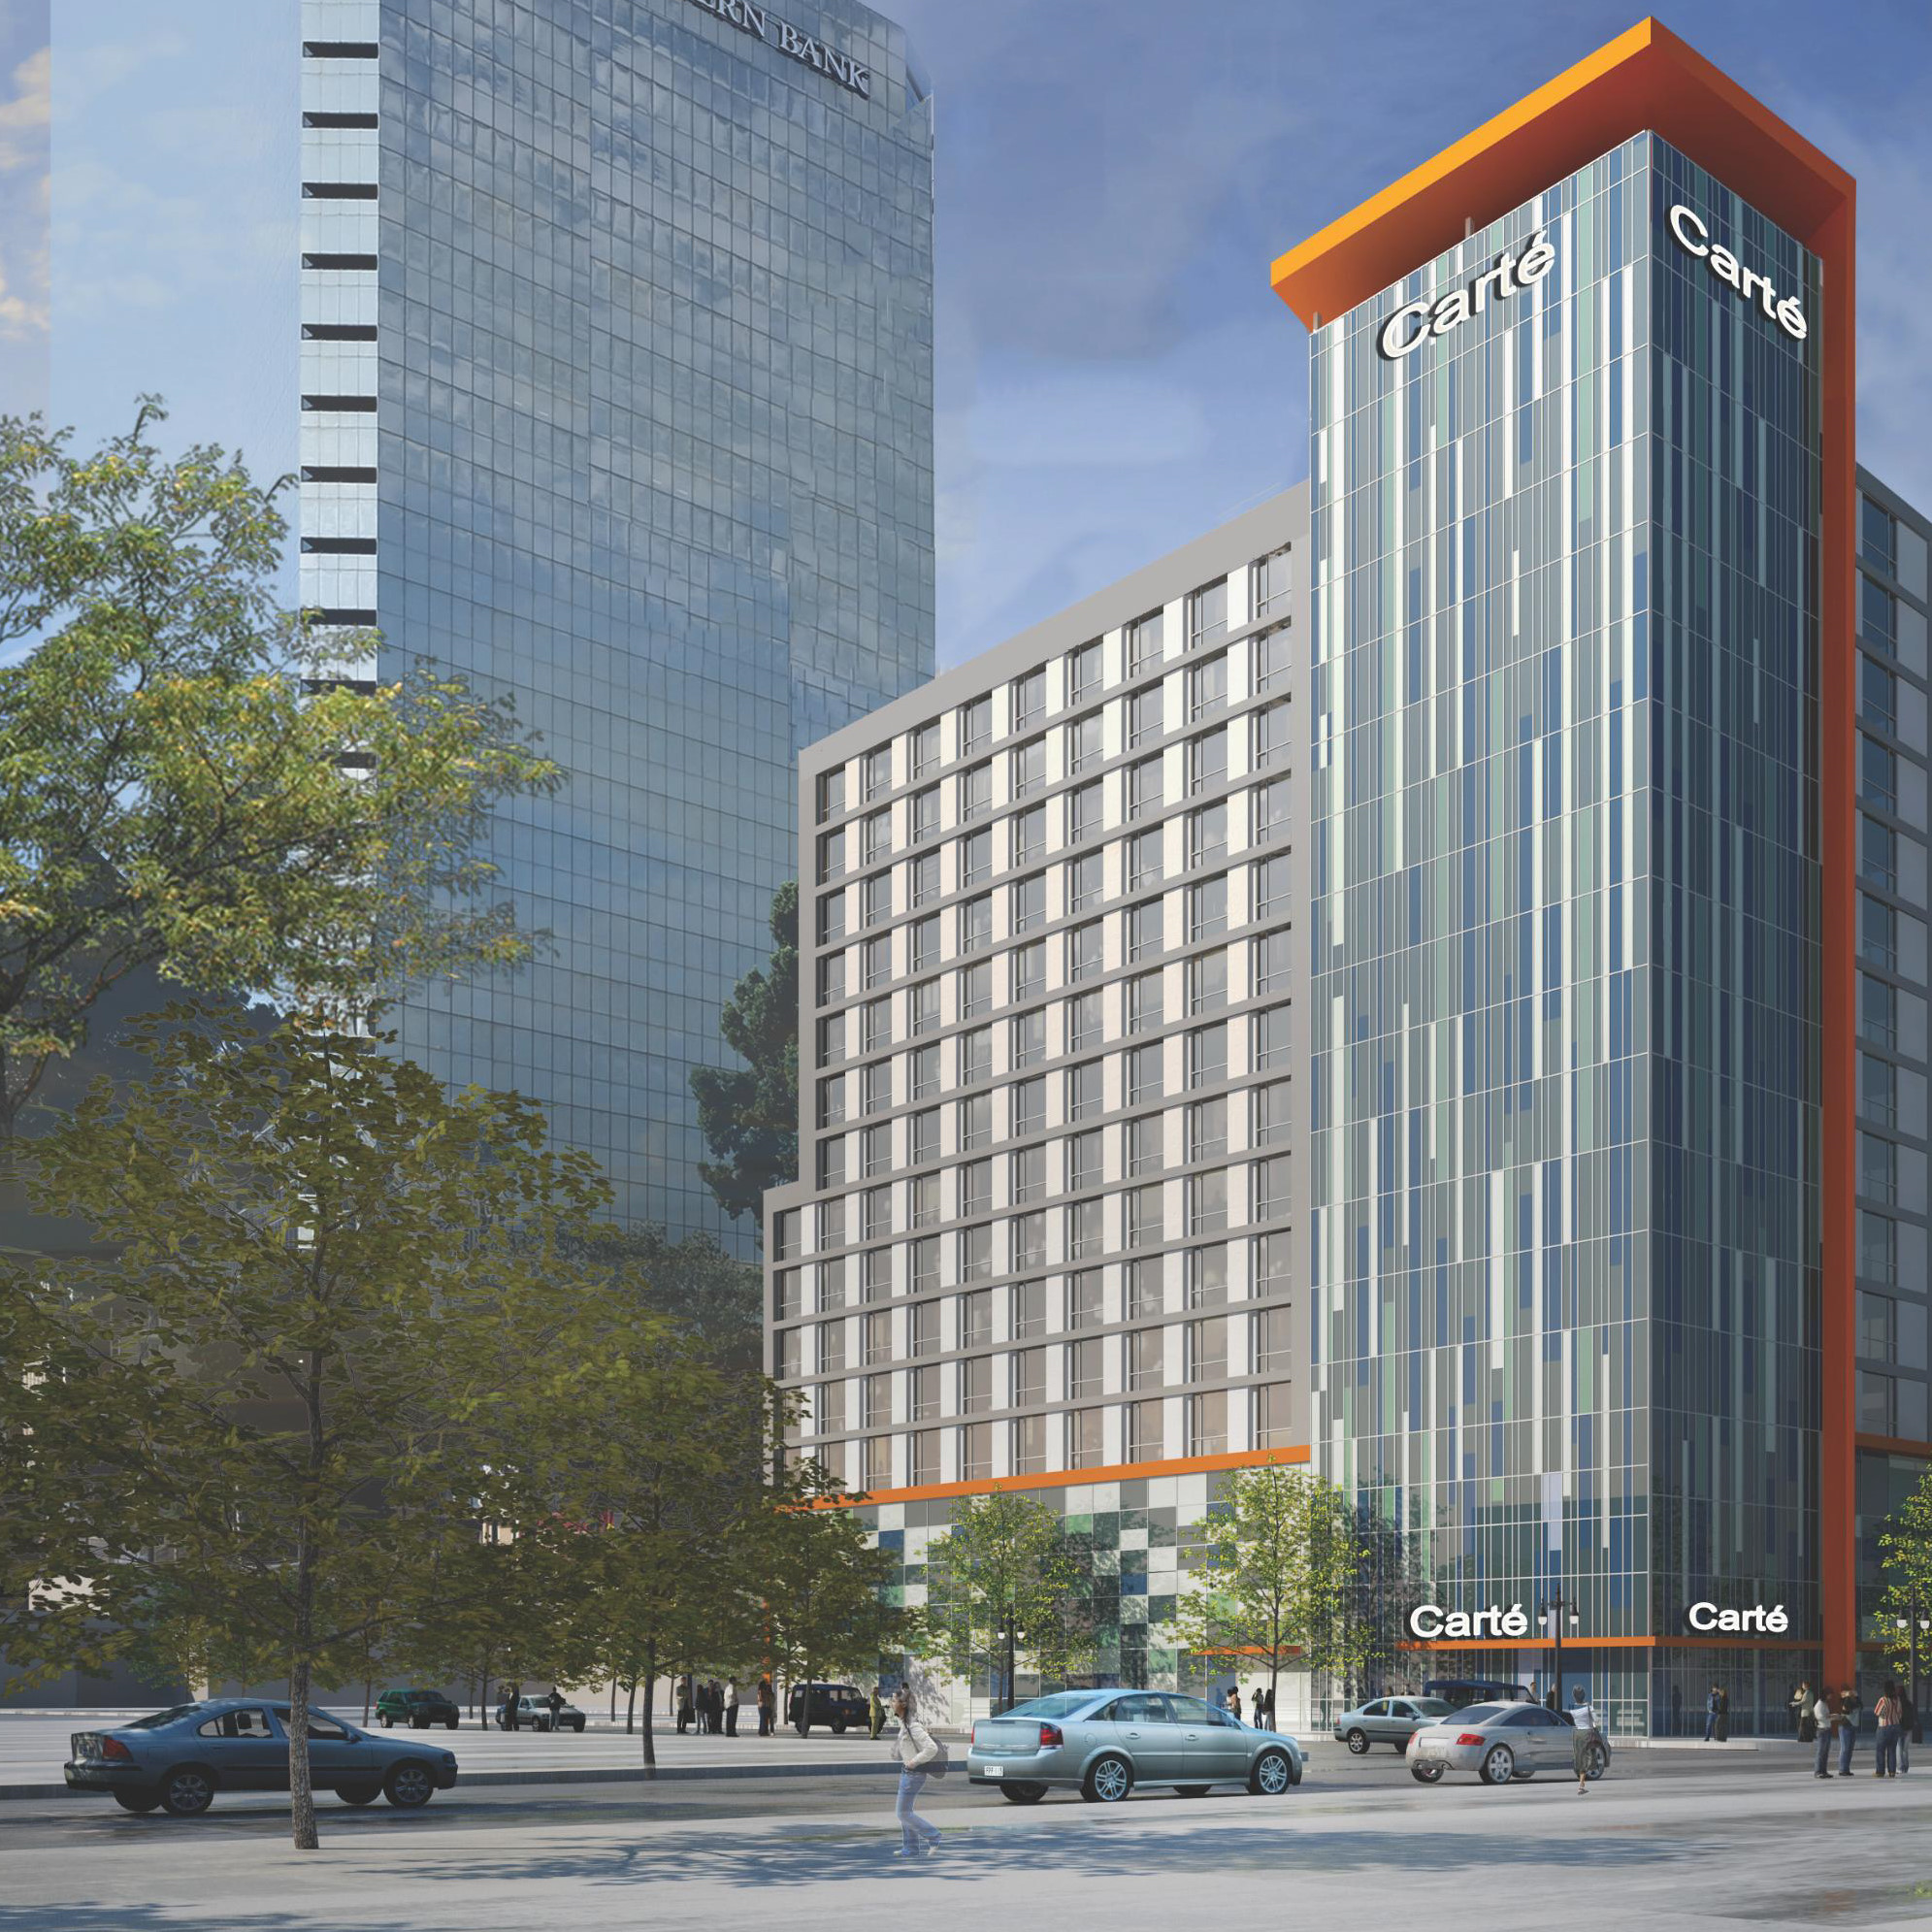 The Carte Hotel  Suites by the Curio Collection by Hilton will rise 14 stories high on the corner of West Ash Street and S